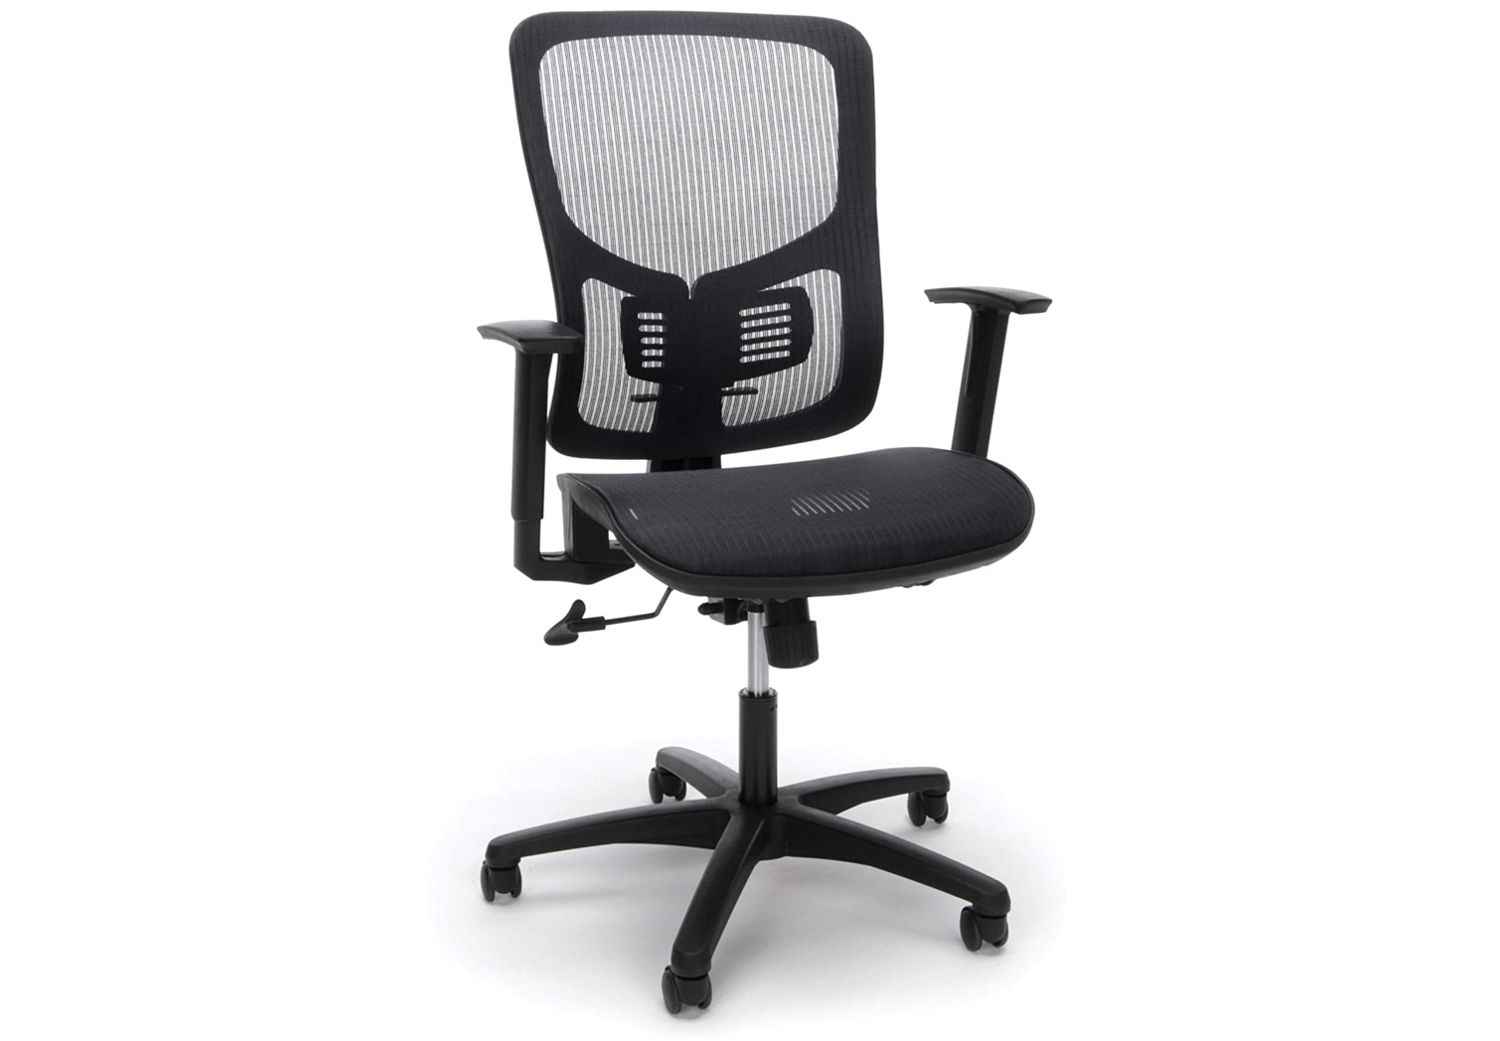 The NetDigz Editors rate the OFM Essentials as the Optional Best Budget Desk Chair.